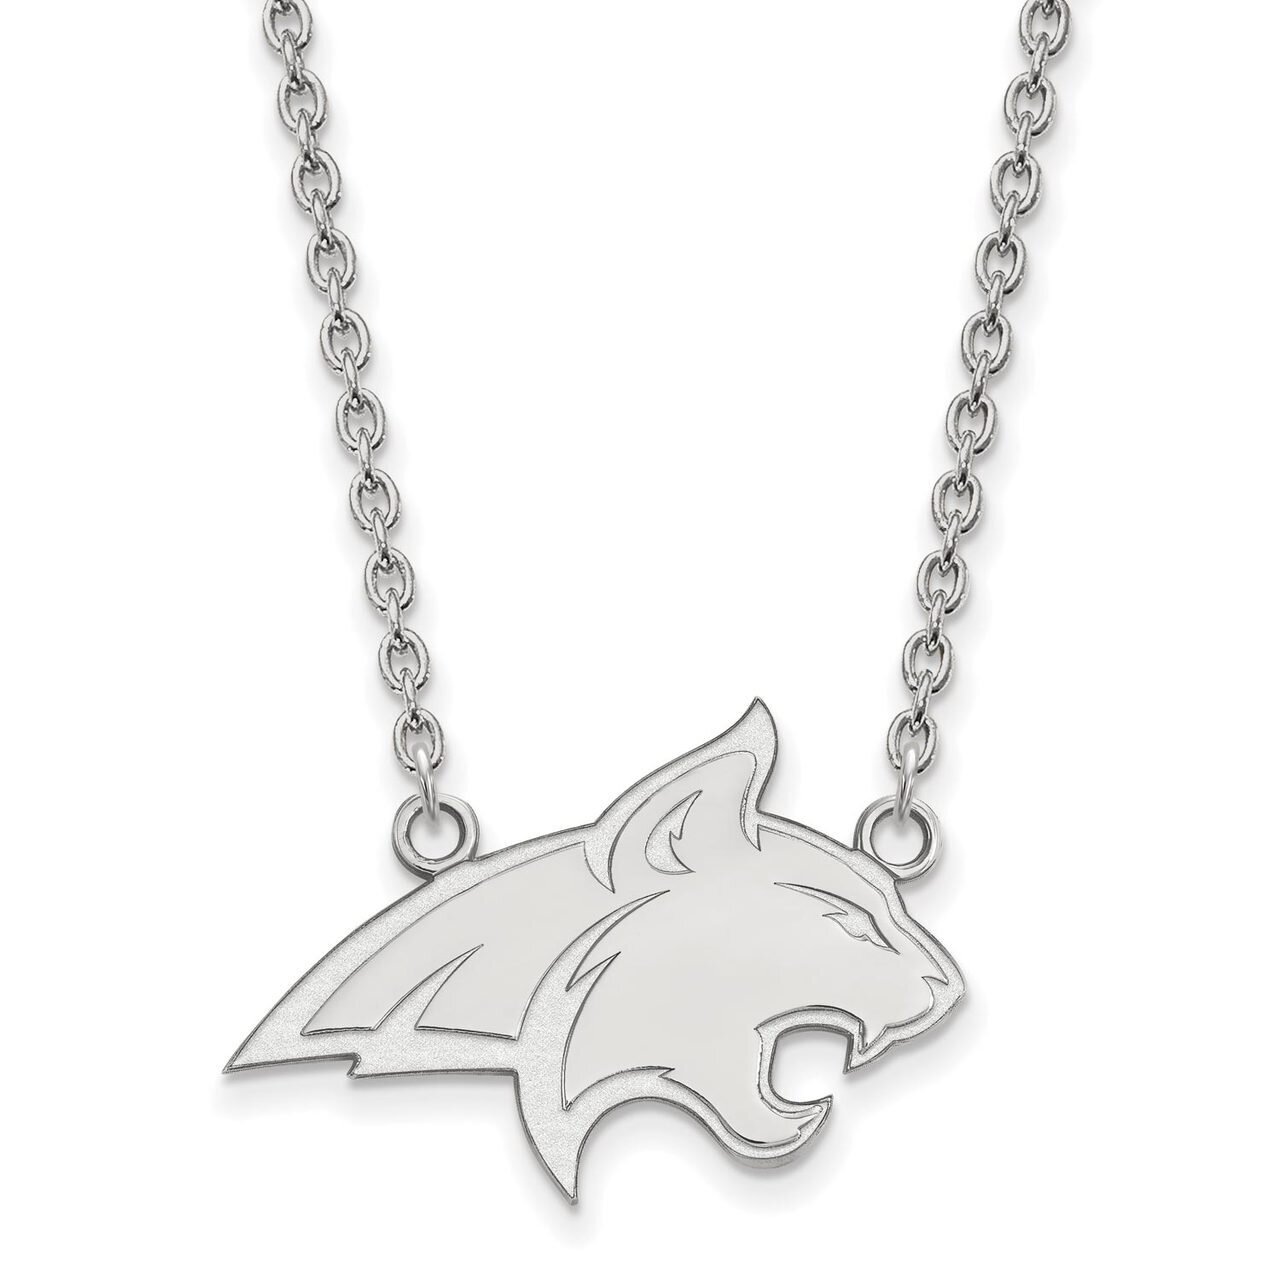 Montana State University Large Pendant with Chain Necklace 10k White Gold 1W010MTU-18